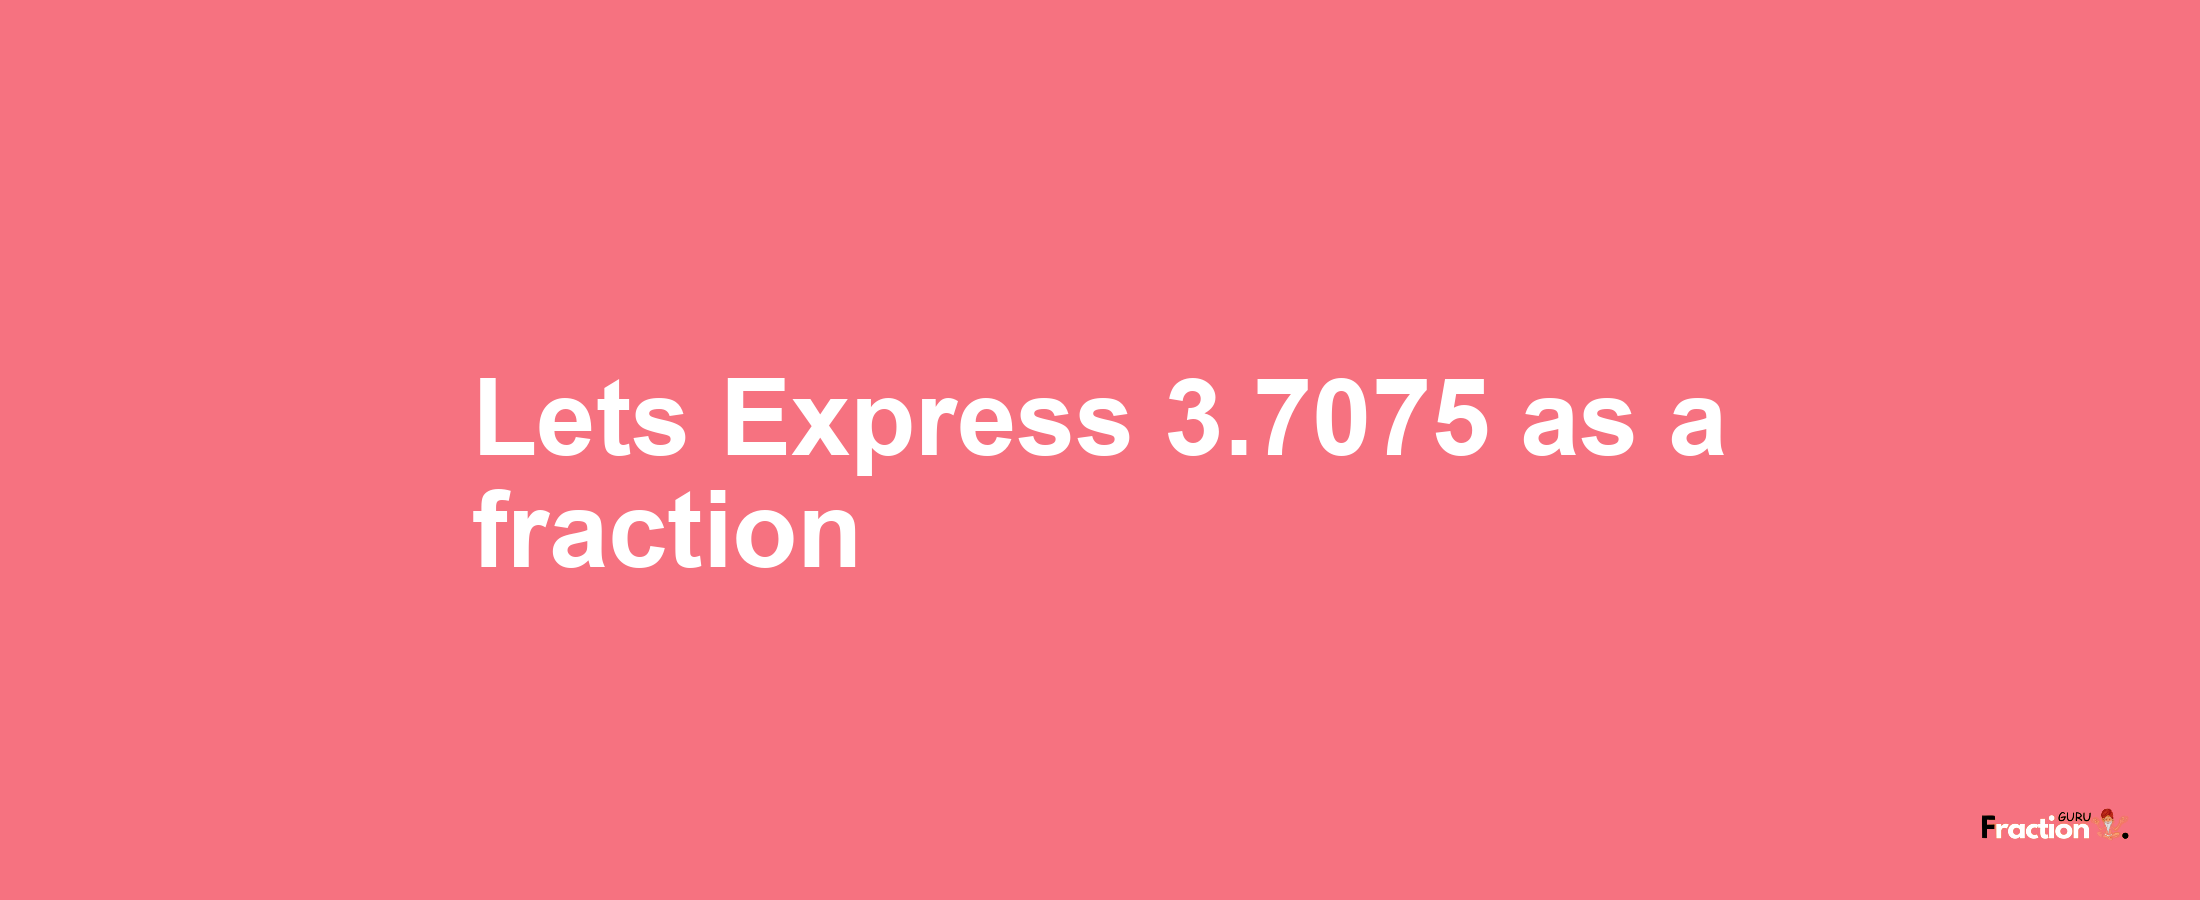 Lets Express 3.7075 as afraction